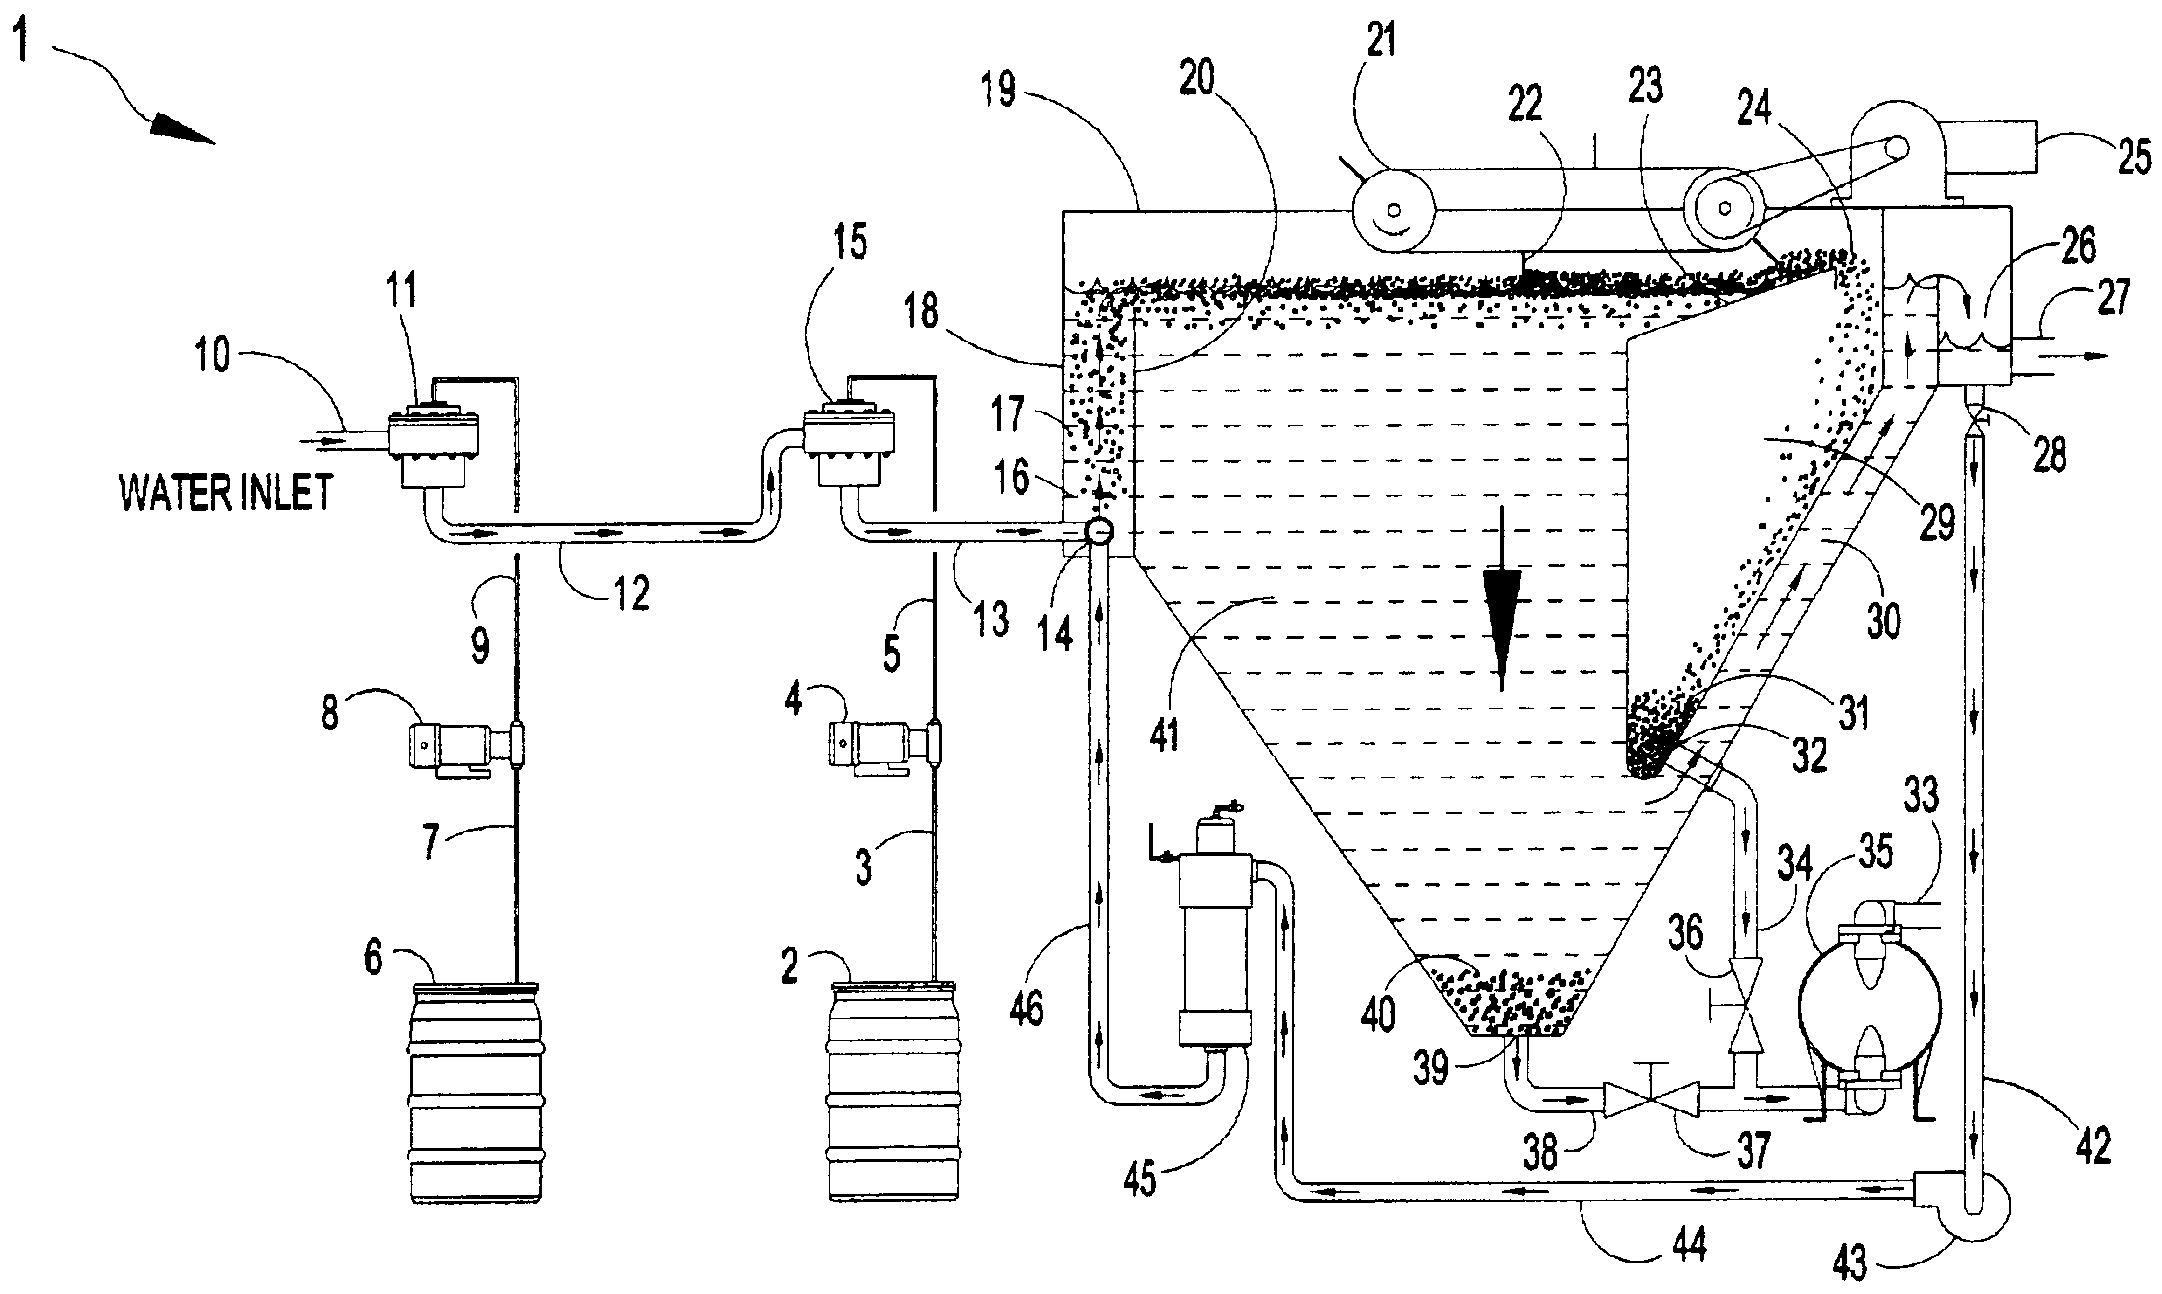 Apparatus for the separation of solids from liquids by dissolved gas floatation